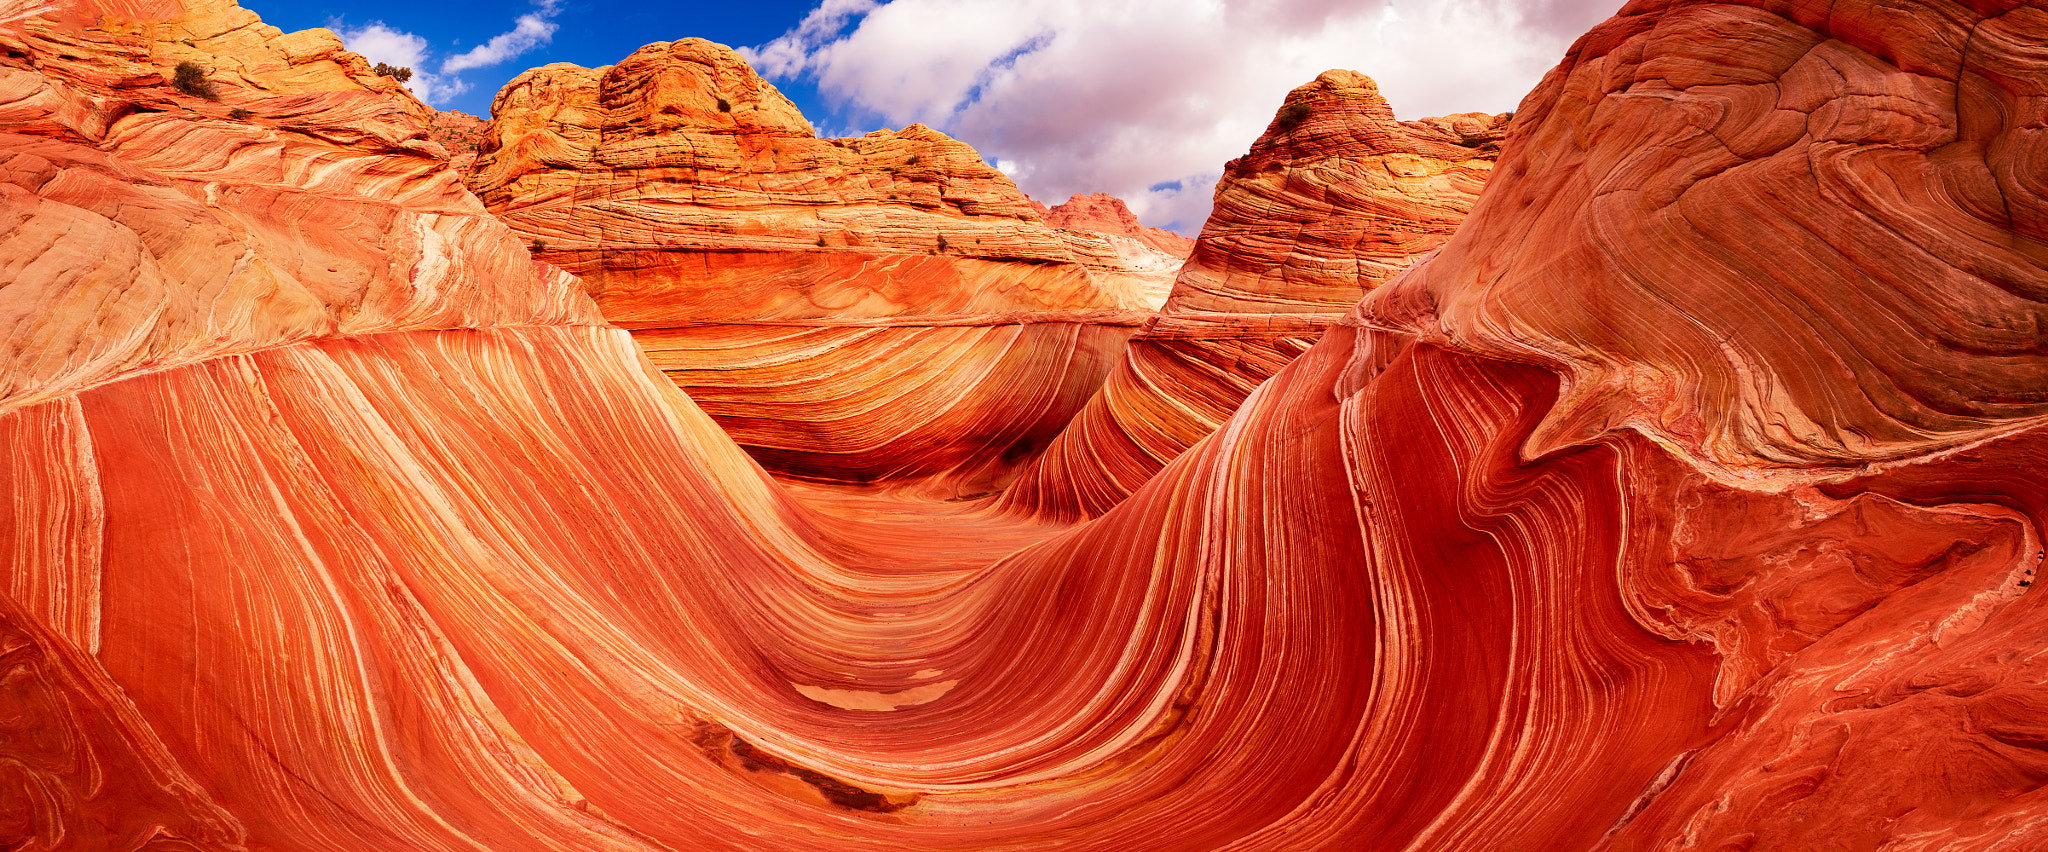 Phase One IQ150 sample photo. Coyote buttes - the wave photography